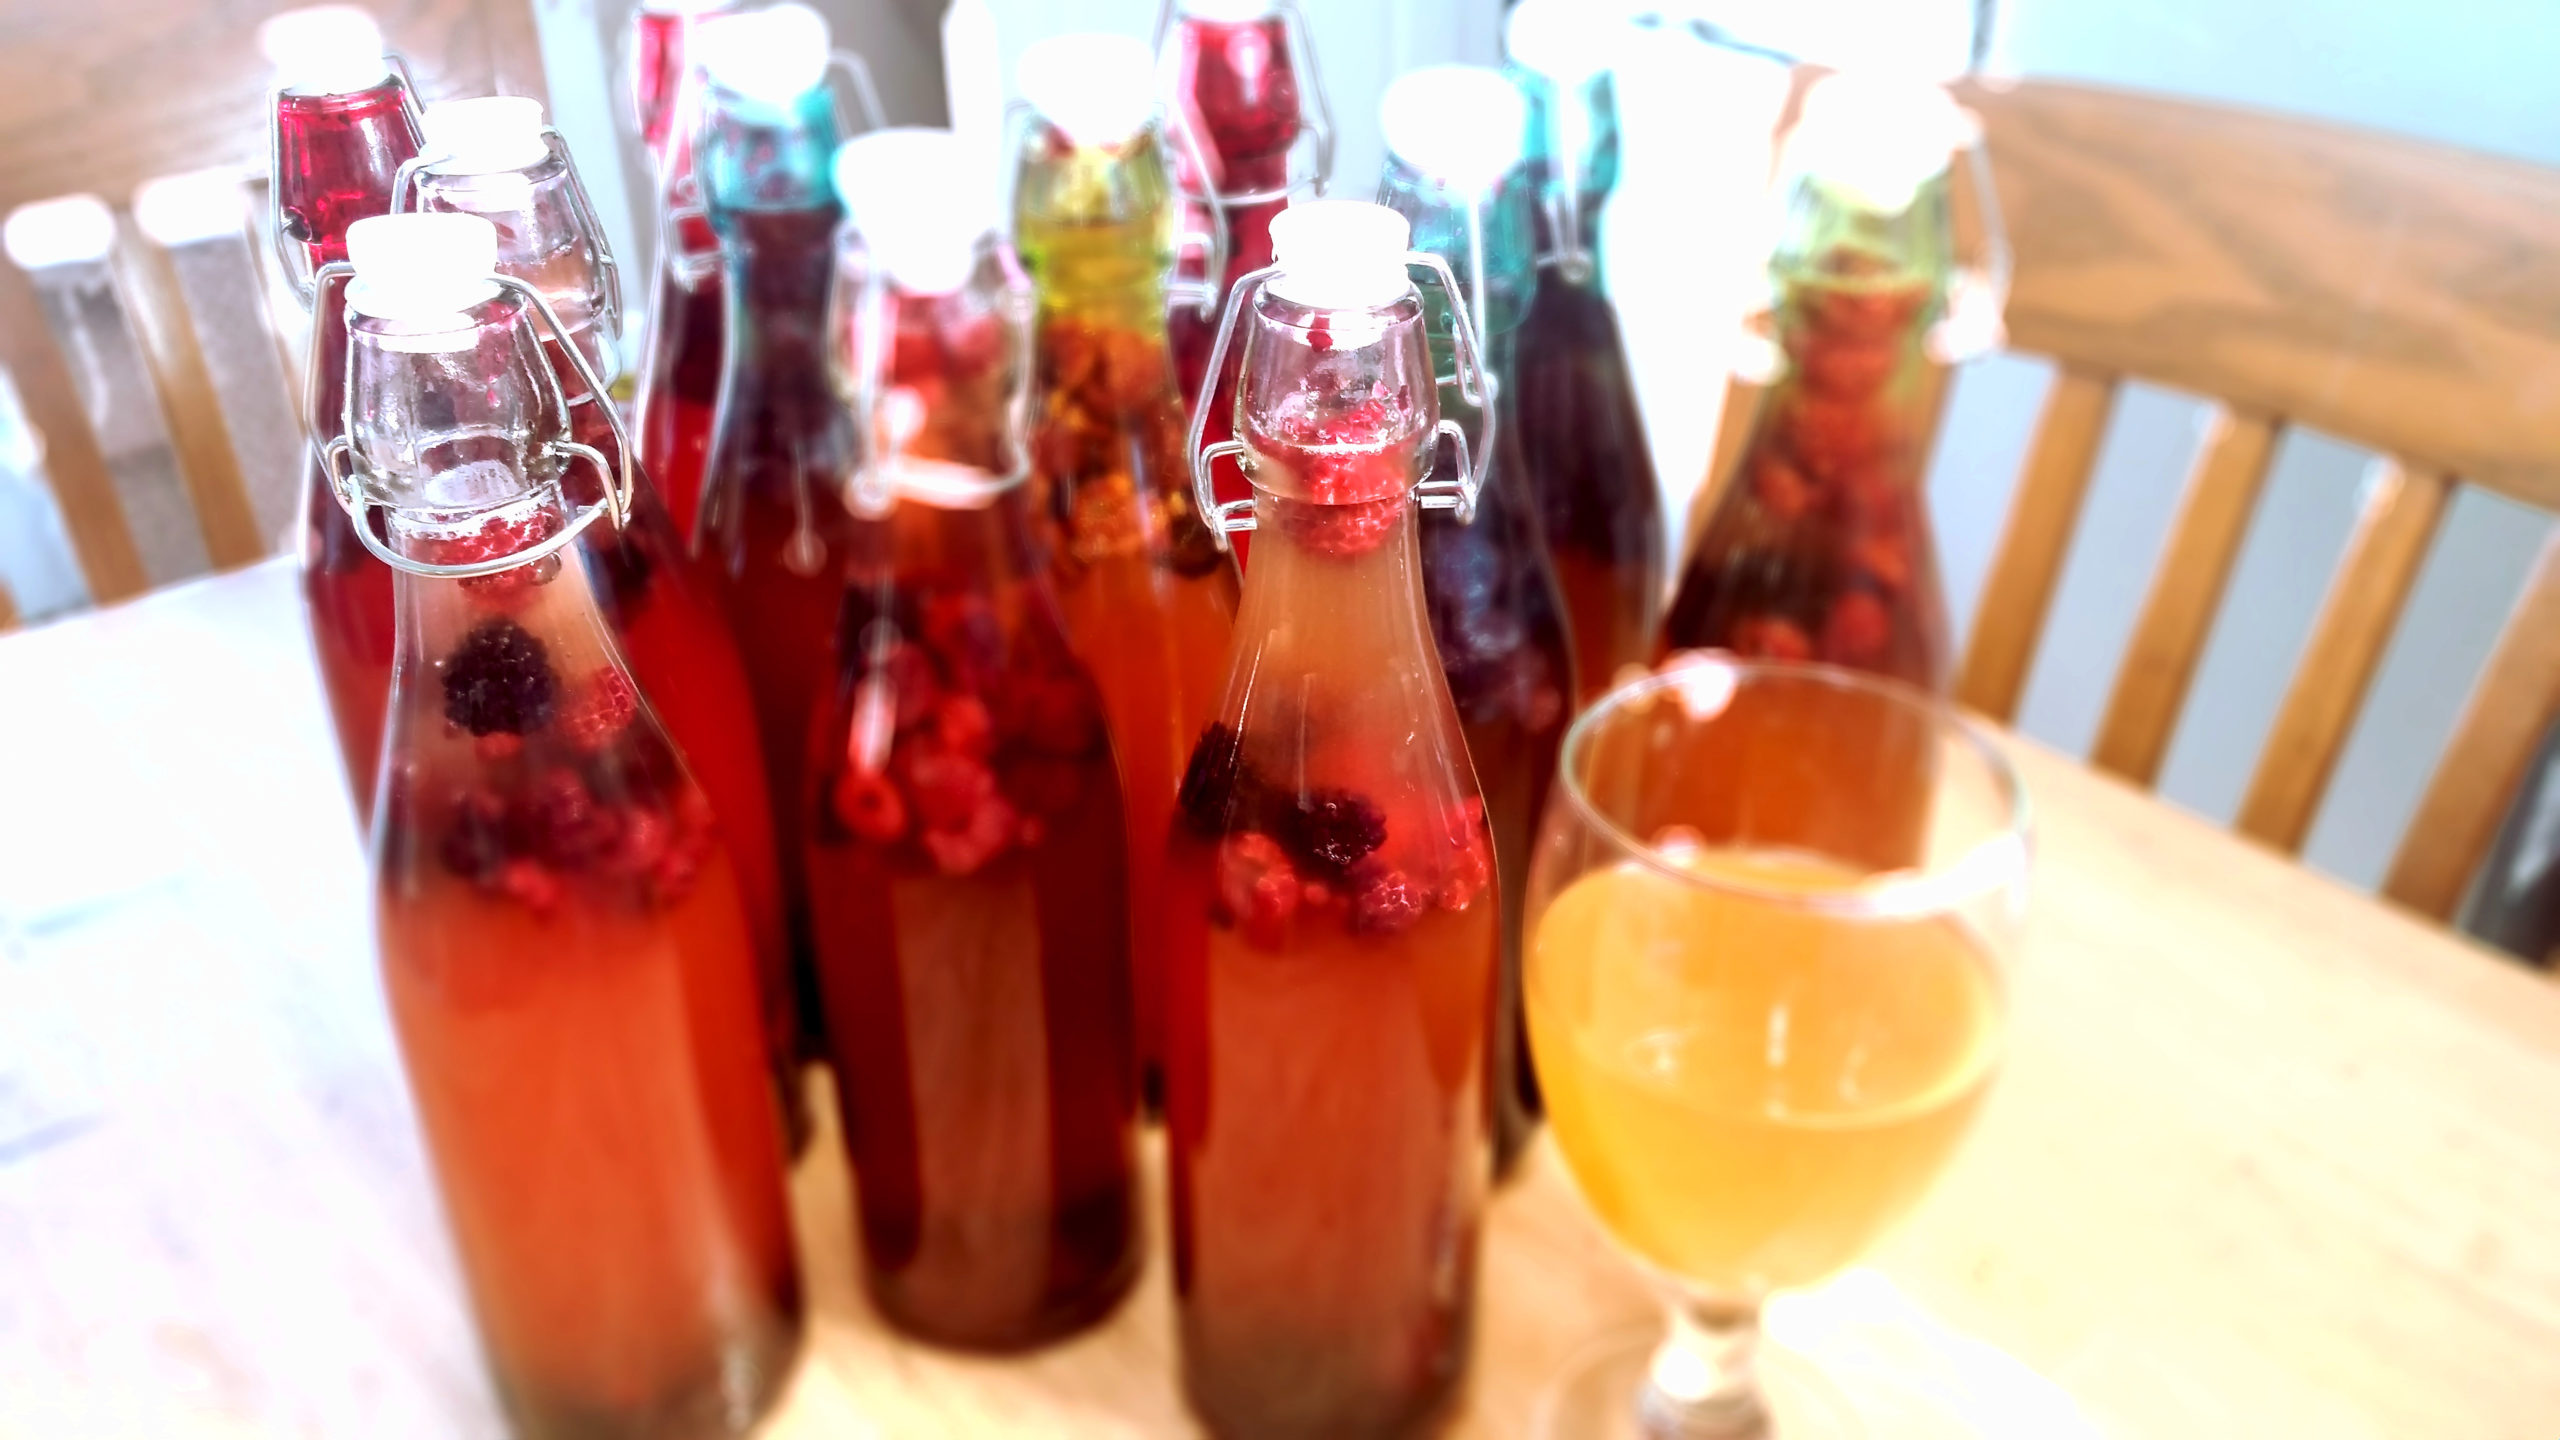 Start making your own fizzy and flavorful kombucha